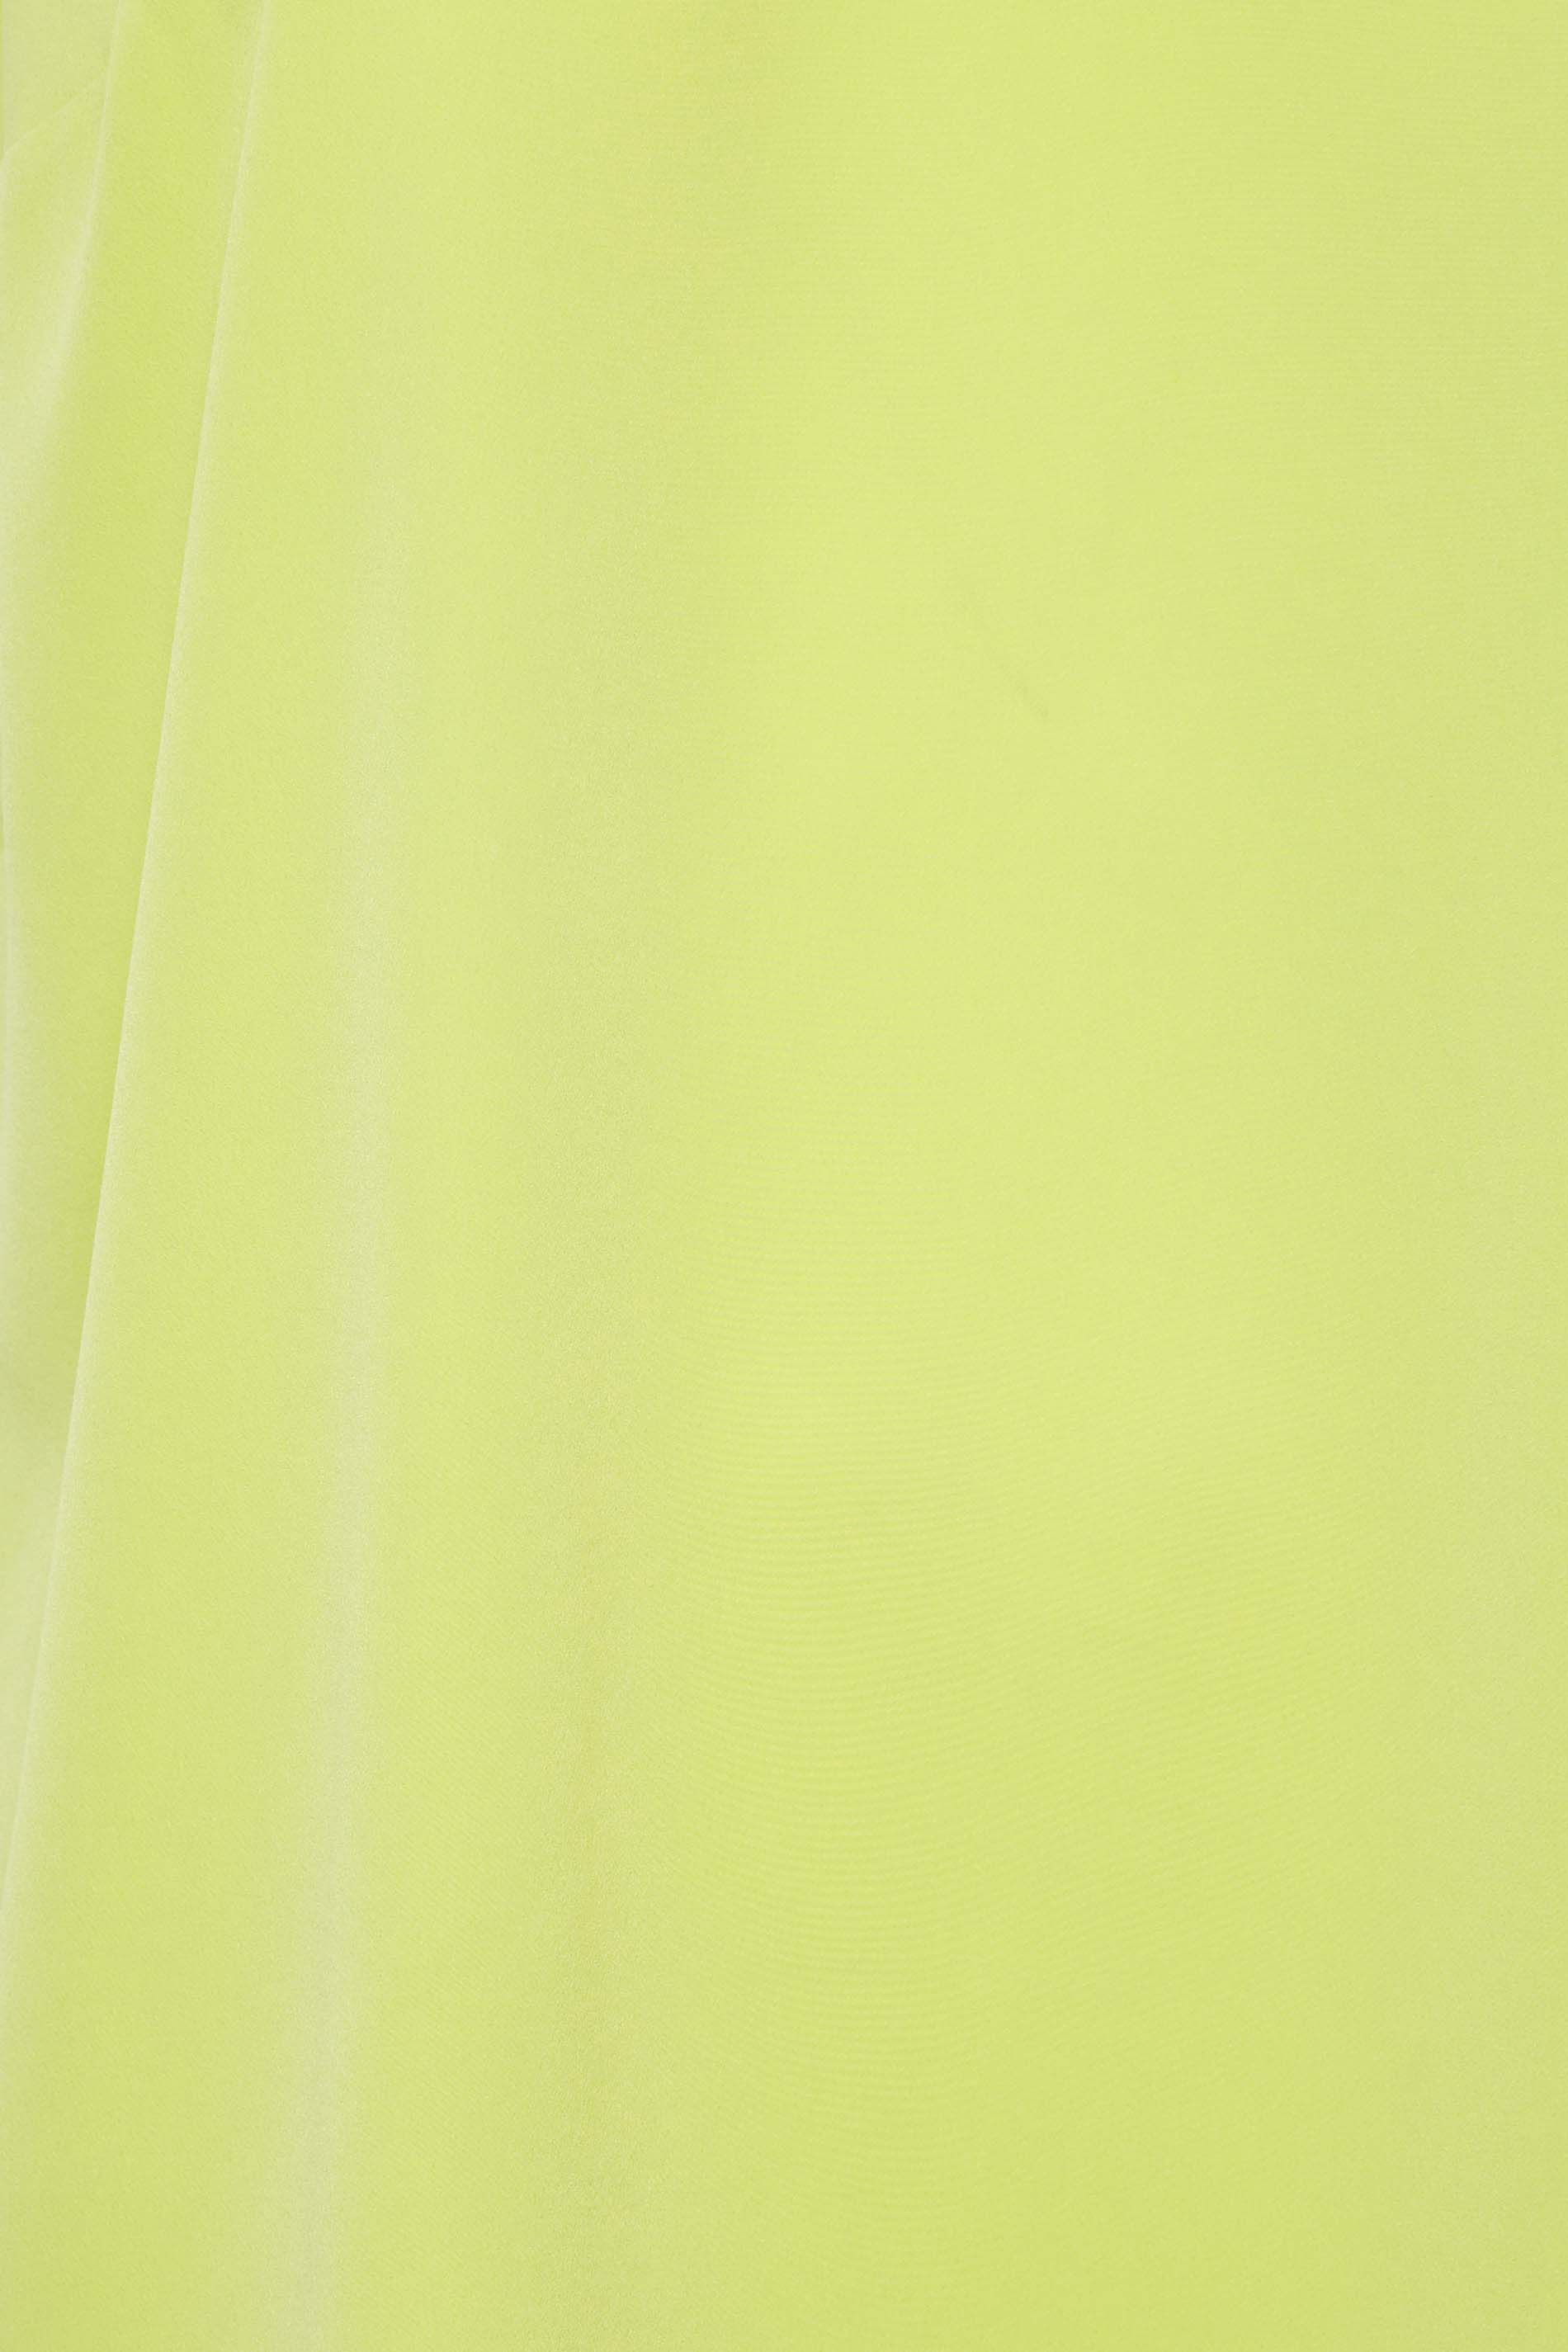 YOURS Curve Plus Size Lime Green Ribbed Swing Cami Vest Top